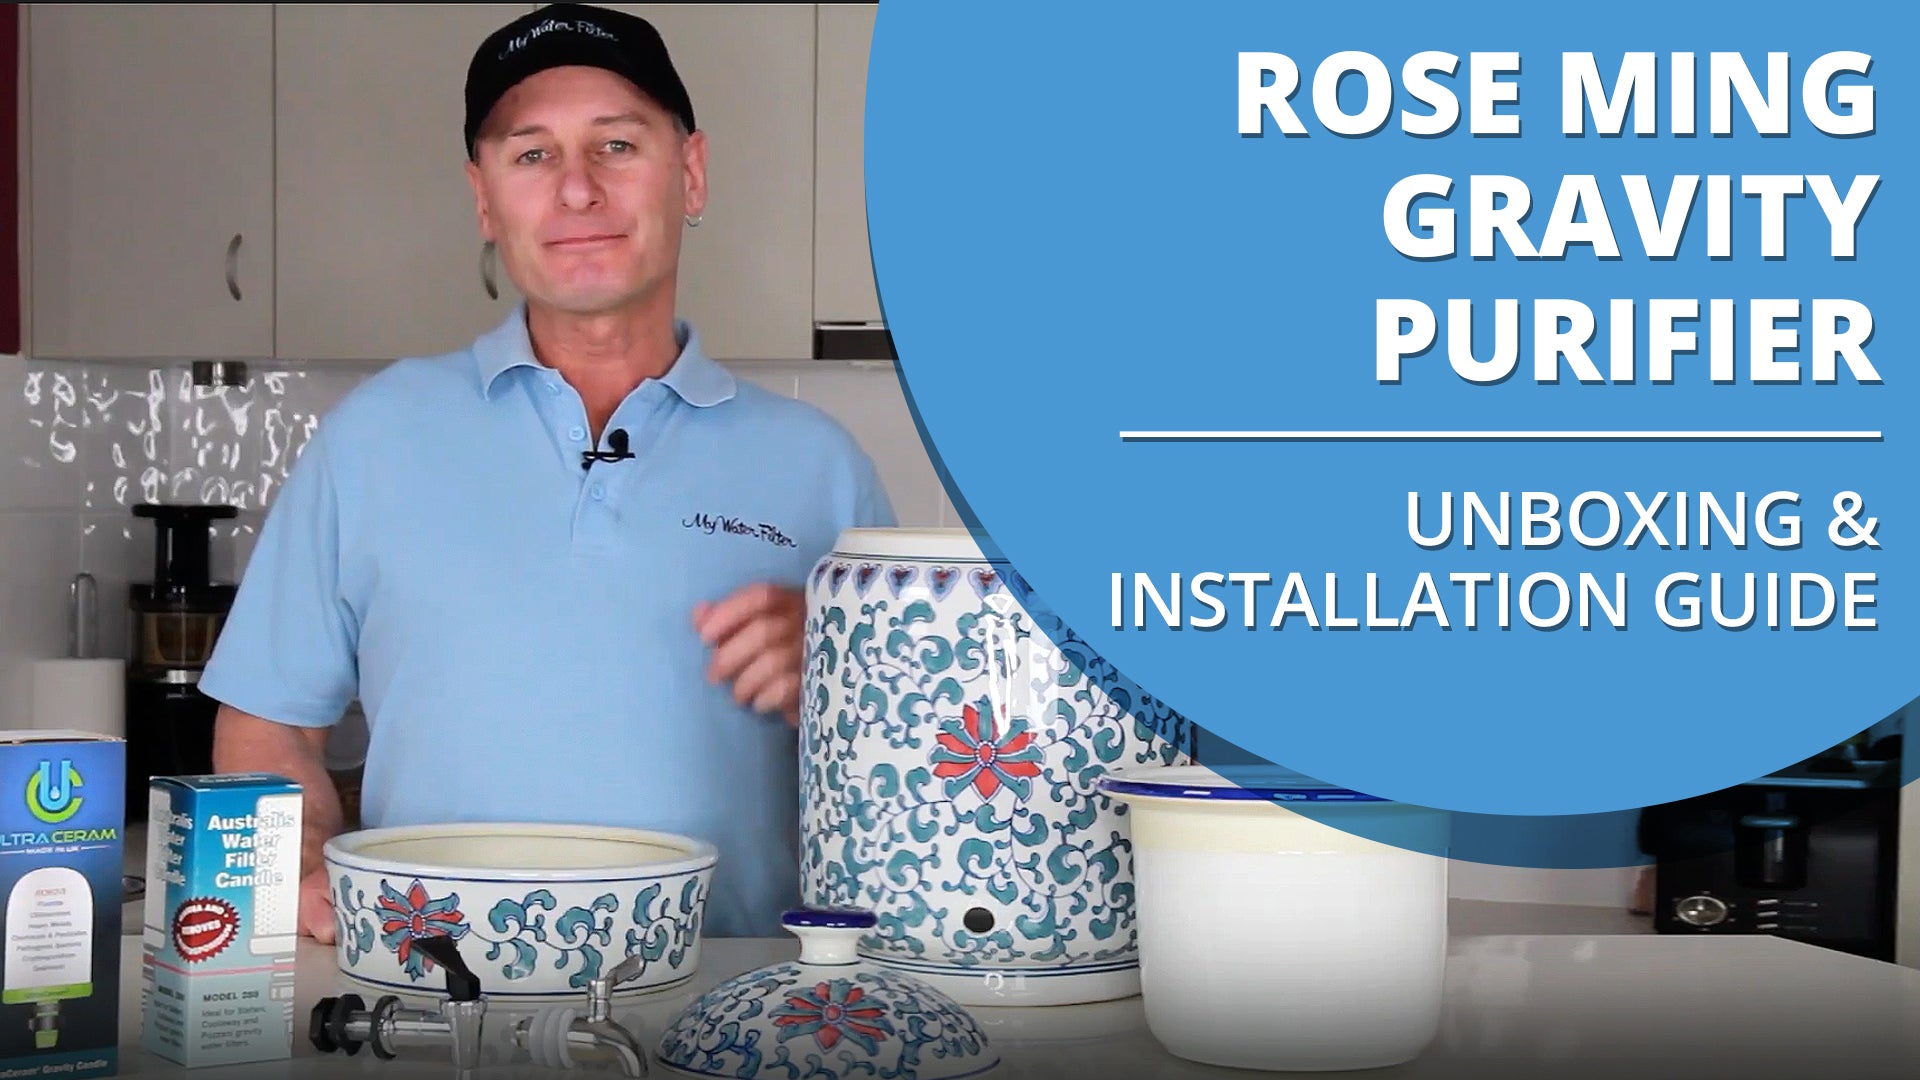 [VIDEO] Rose Ming Porcelain Water Purifier with Ceramic Filter Candle - Unboxing & Installation Video